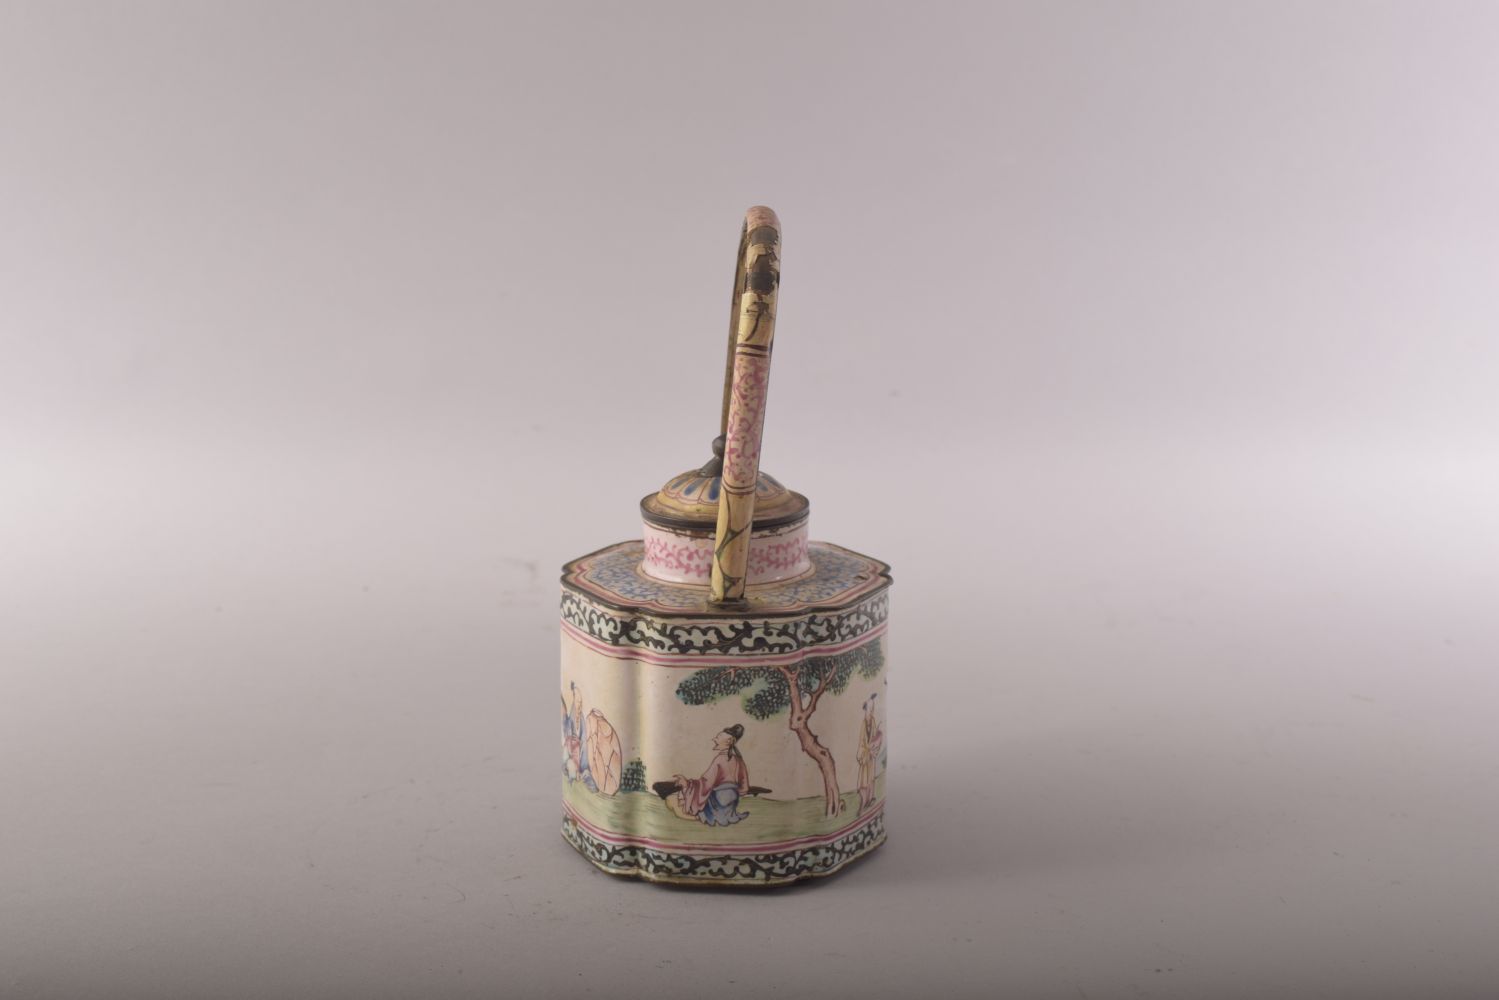 A SMALL CHINESE CANTON ENAMELLED TEAPOT, decorated with a scene of figures in an outdoor setting - Image 4 of 8